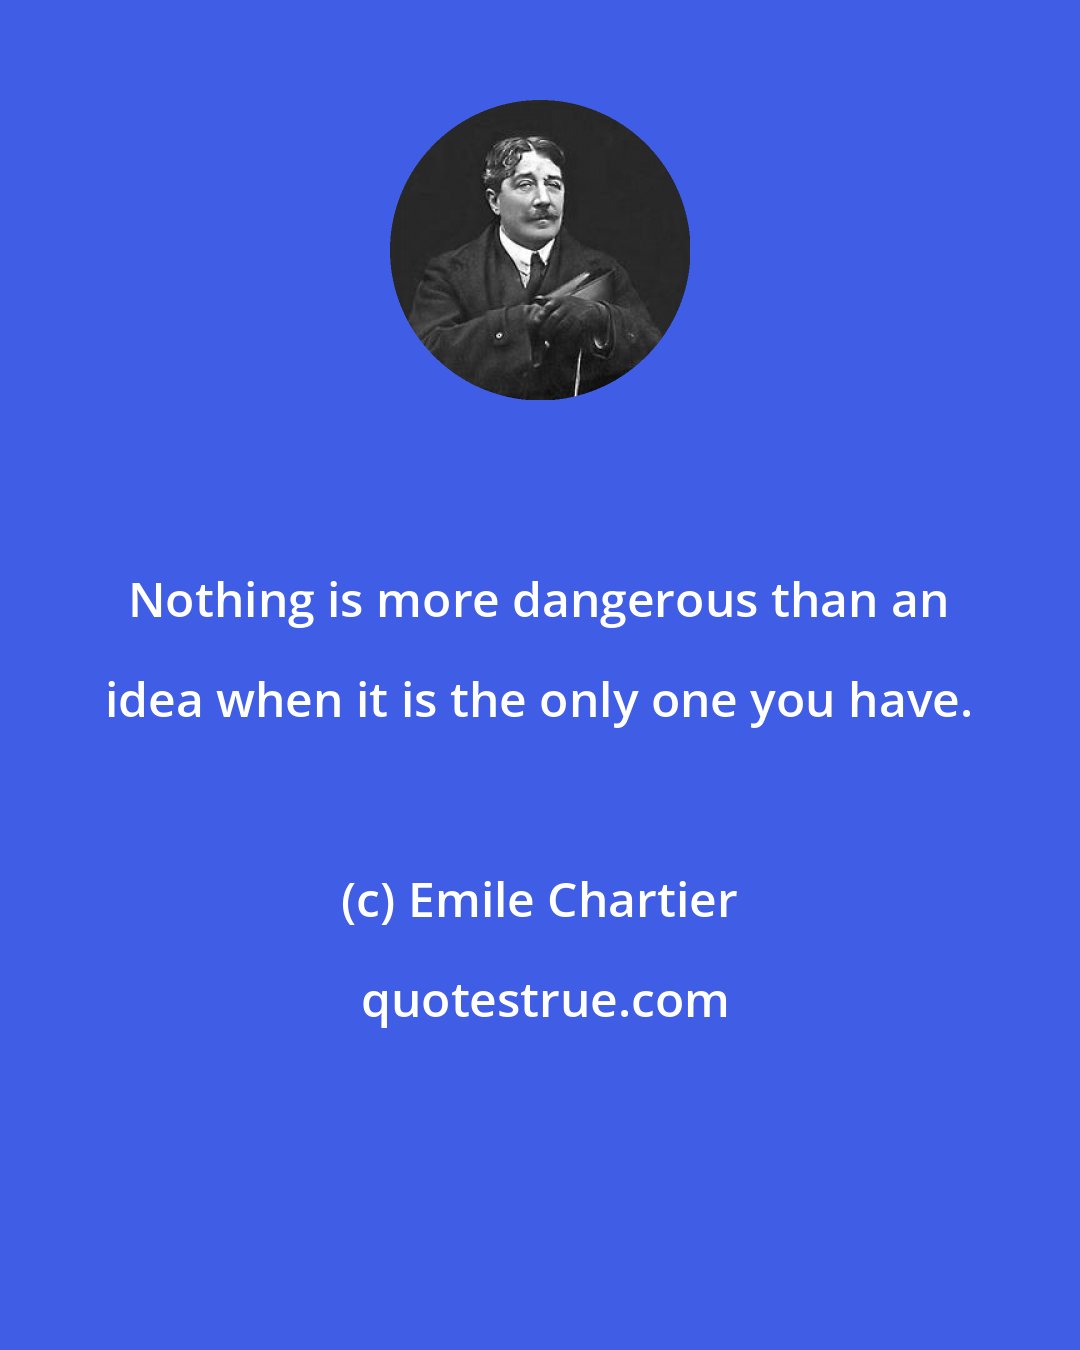 Emile Chartier: Nothing is more dangerous than an idea when it is the only one you have.